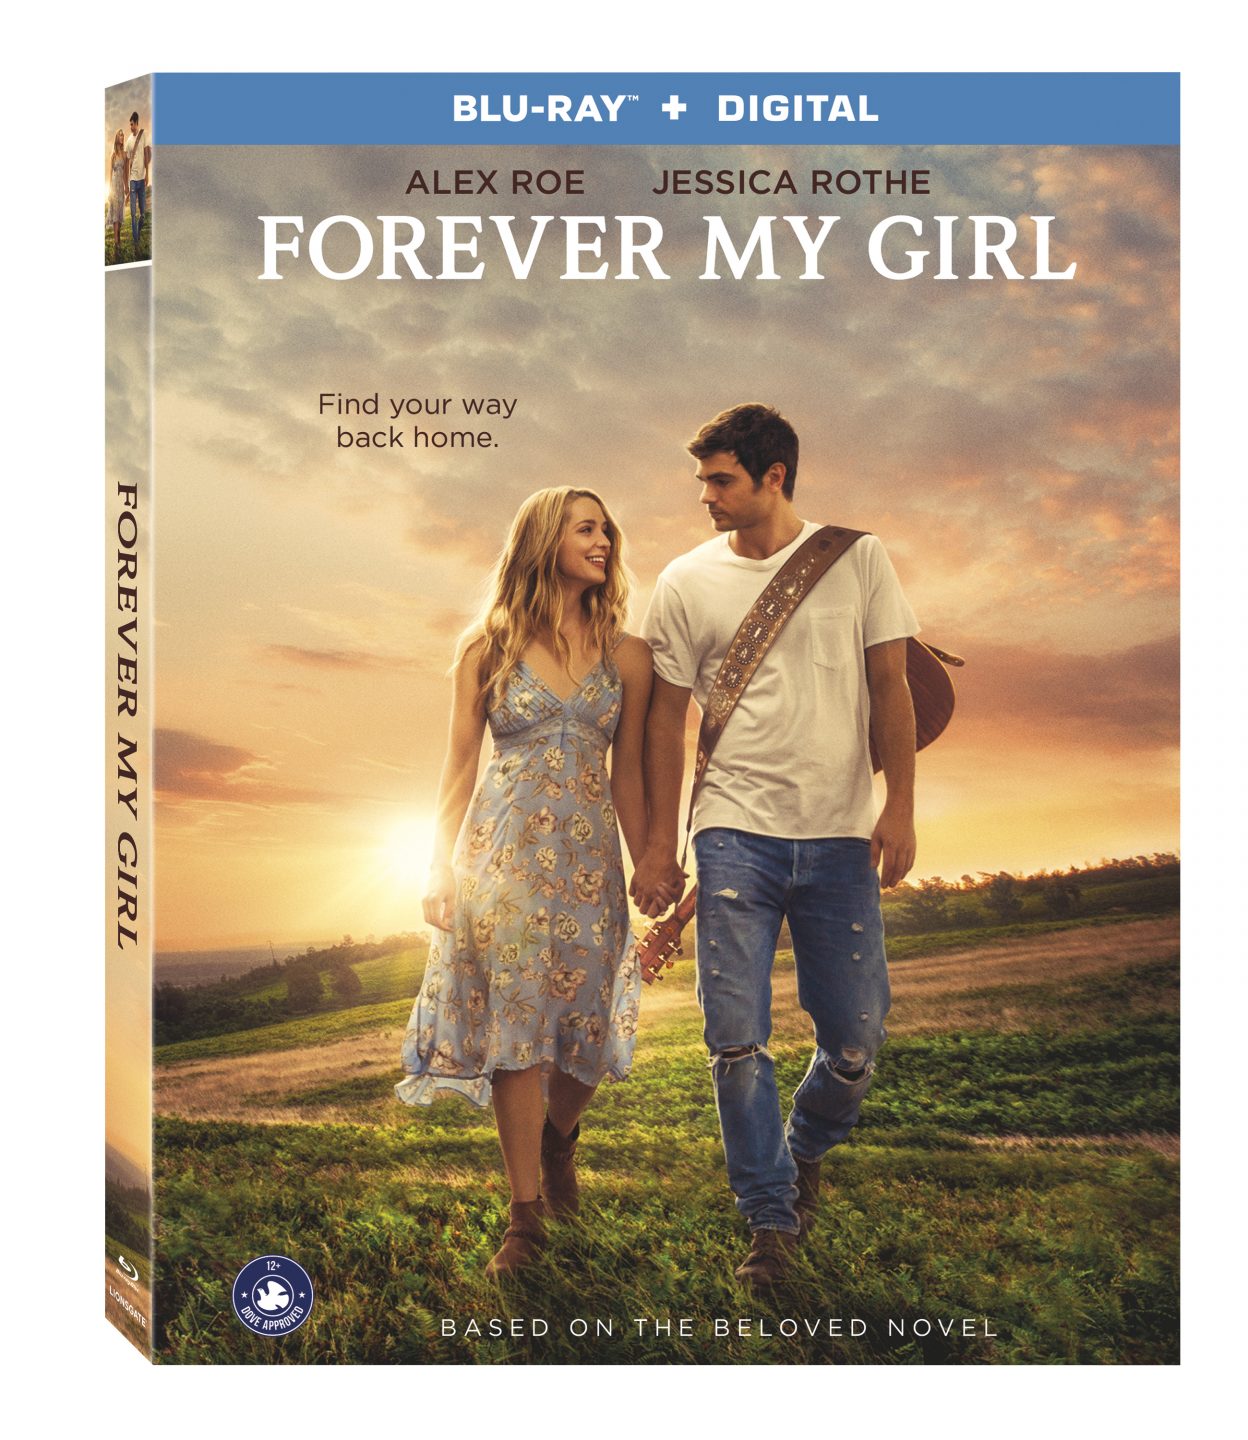 Forever My Girl Blu-Ray Combo Pack Cover (Lionsgate Home Entertainment)